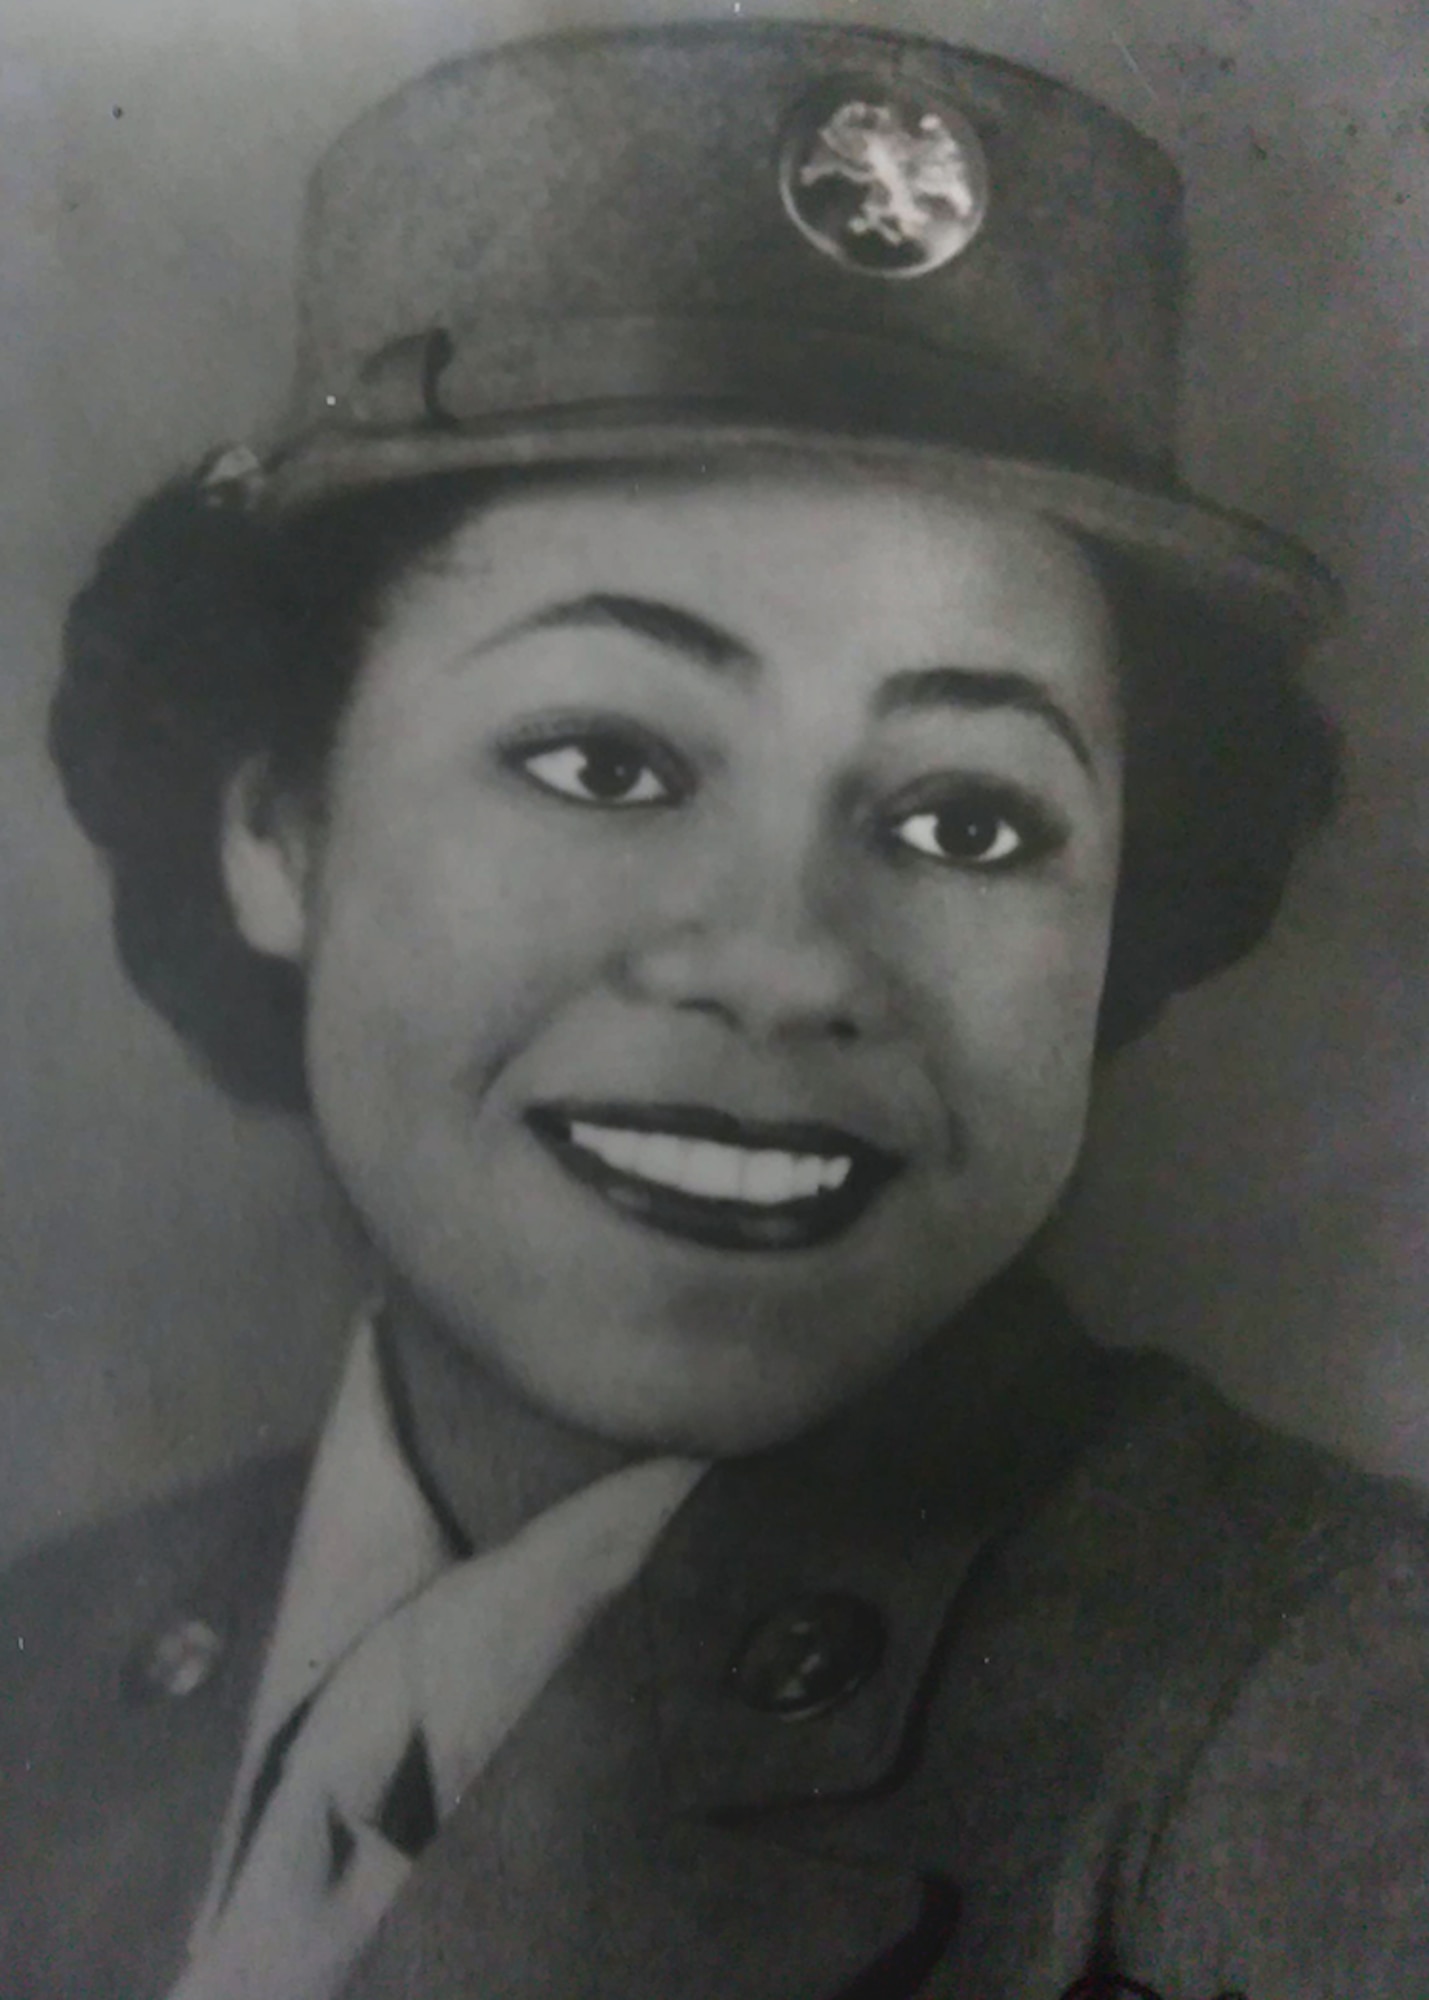 U.S. Army Air Corps Cpl. Lena Derriecott served as a nurse assistant at Douglas Army Air Base and overseas in England during World War II. (Photo courtesy Lena Derriecott)